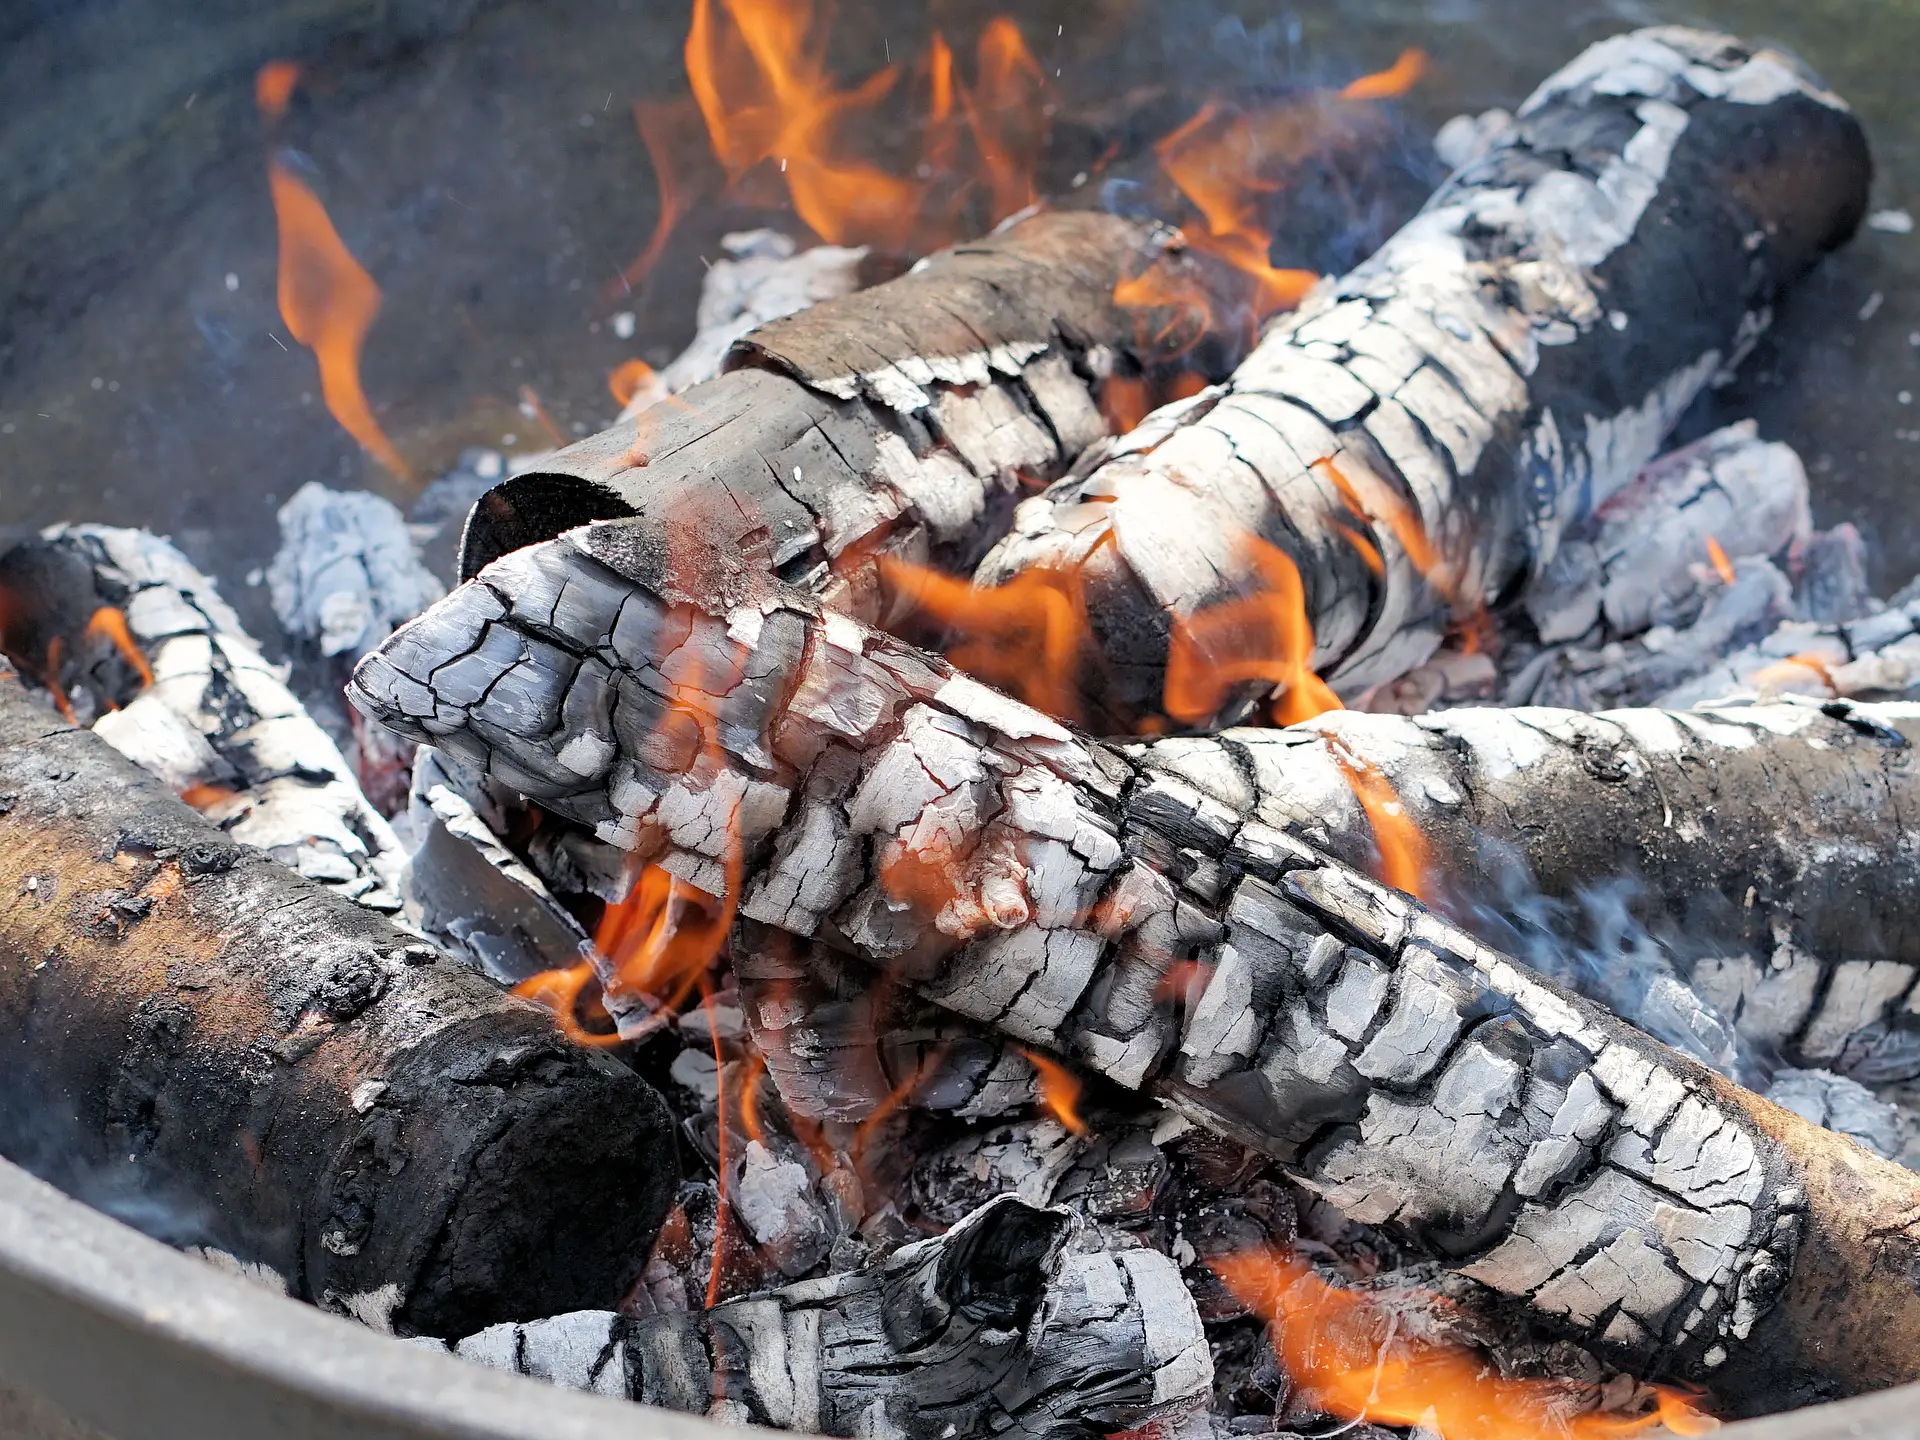 How To Start A Wood Burning Fire Pit, How To Use Fire Pit Ashes